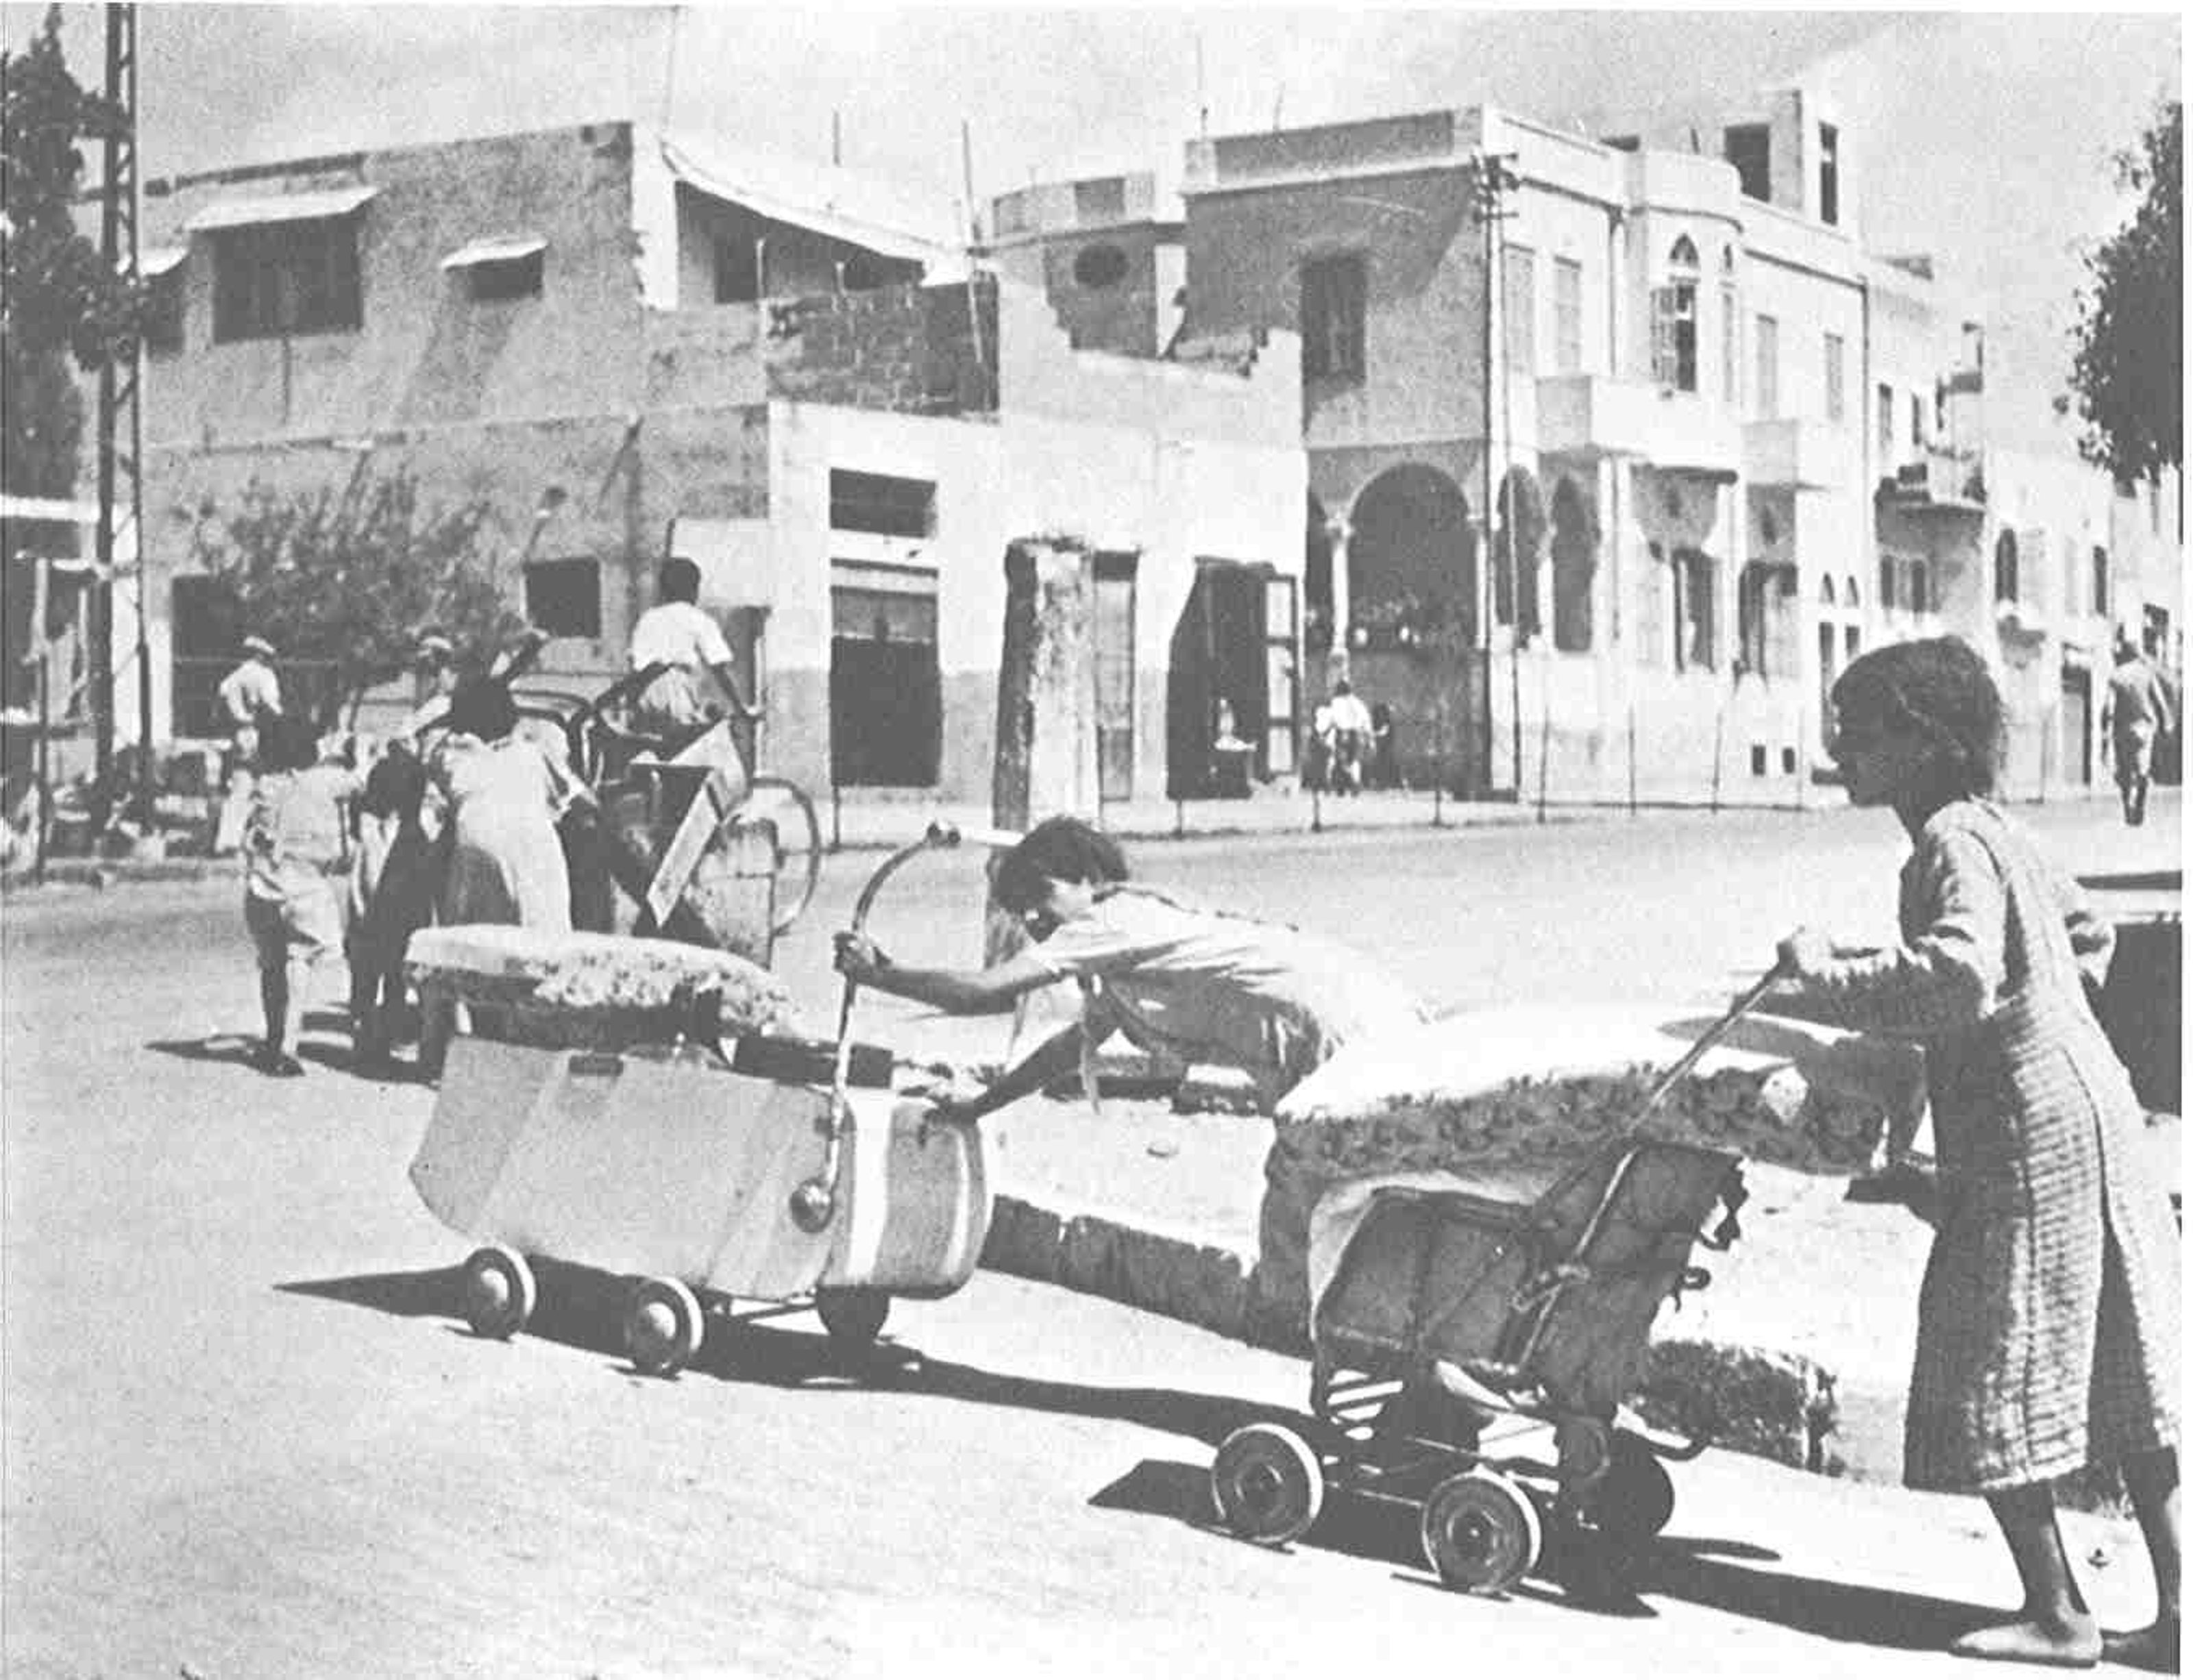 Black and white photograph of Jaffa's residents attempting to salvage whatever they can as they are being ethnically cleansed.